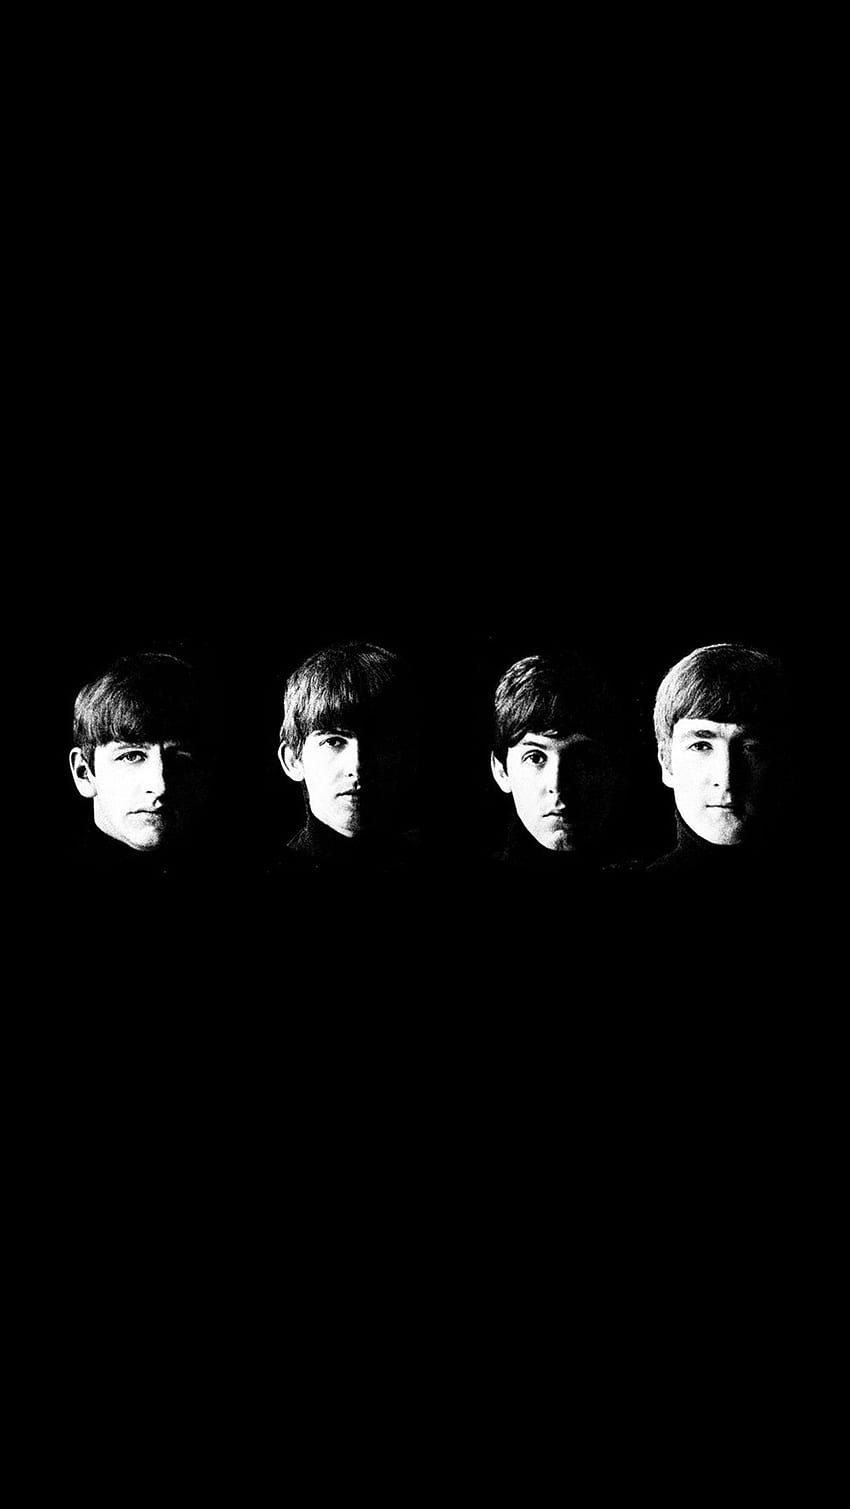 Benjamim Silva On Knowing Me Knowing You Just Know Your Craft Beatles The Beatles Beatles Poster John Lennon Iphone Hd Phone Wallpaper Pxfuel